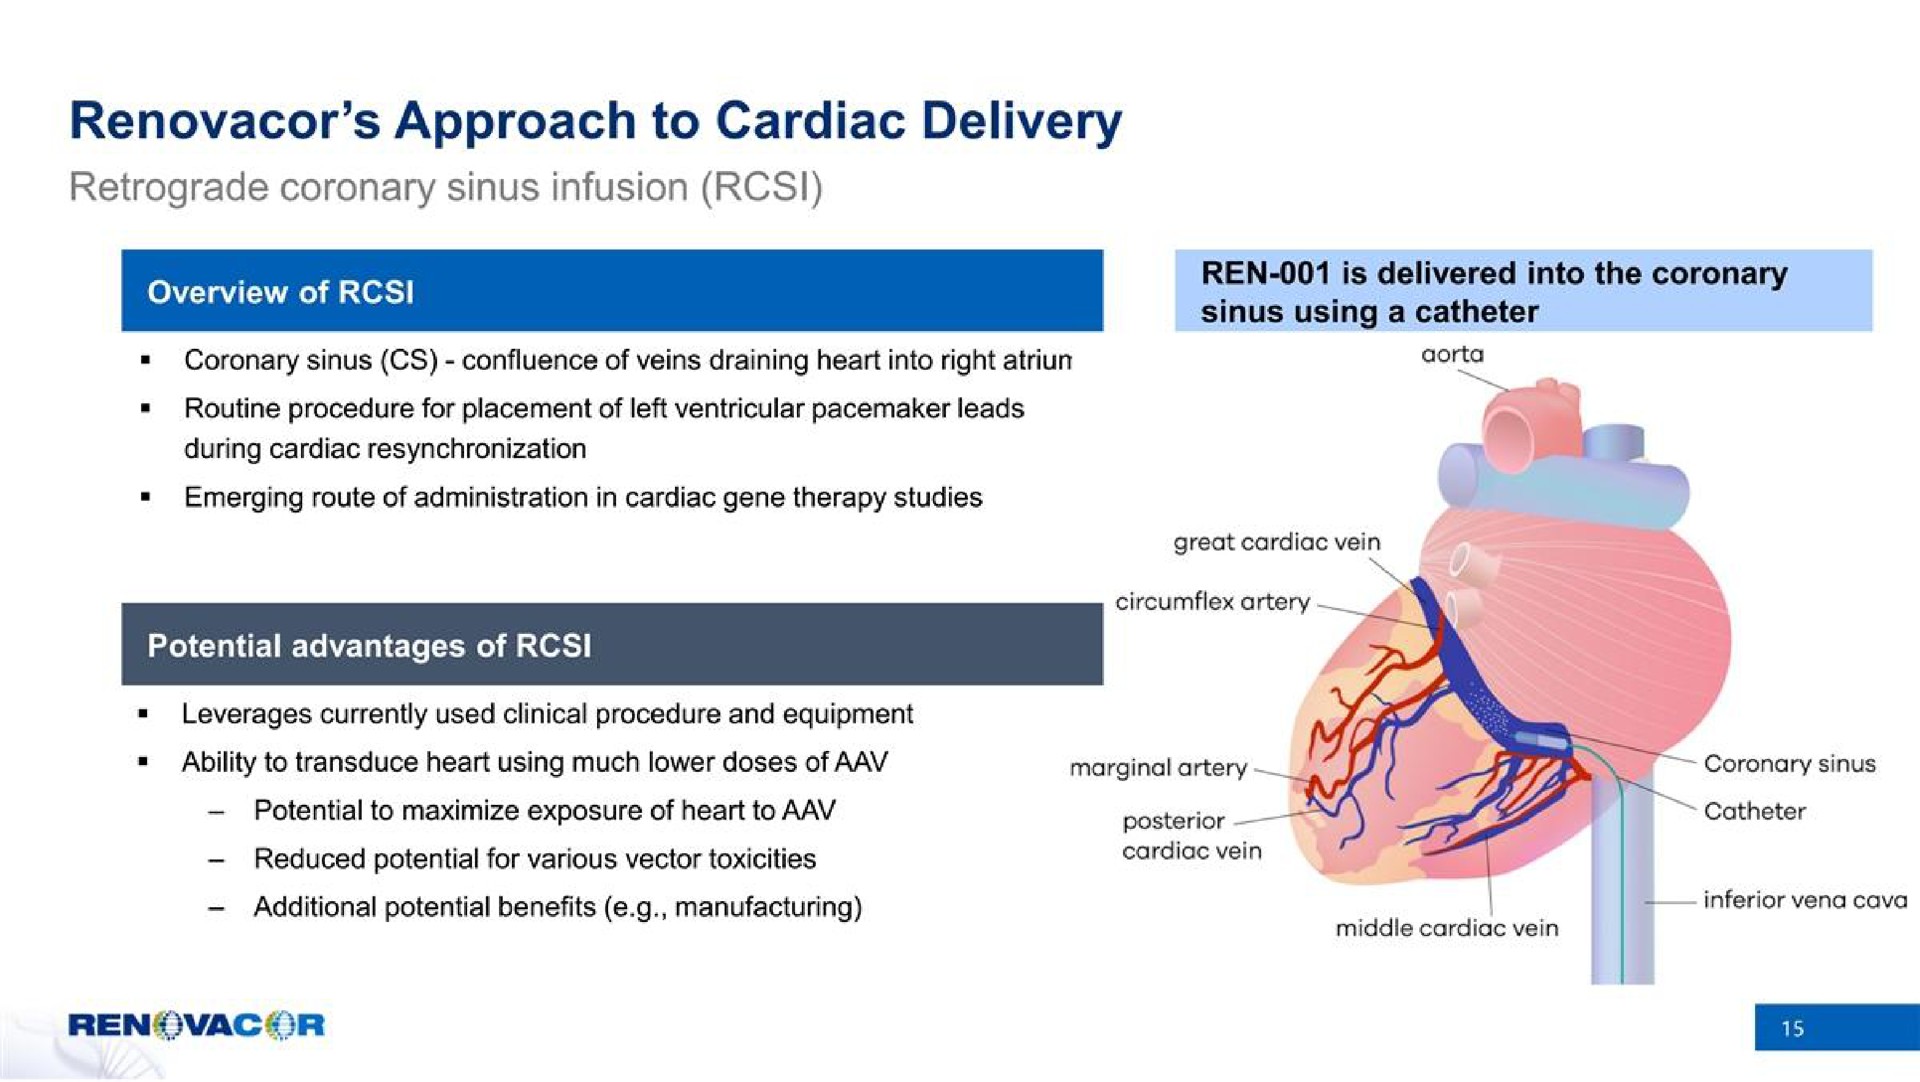 approach to cardiac delivery | Renovacor